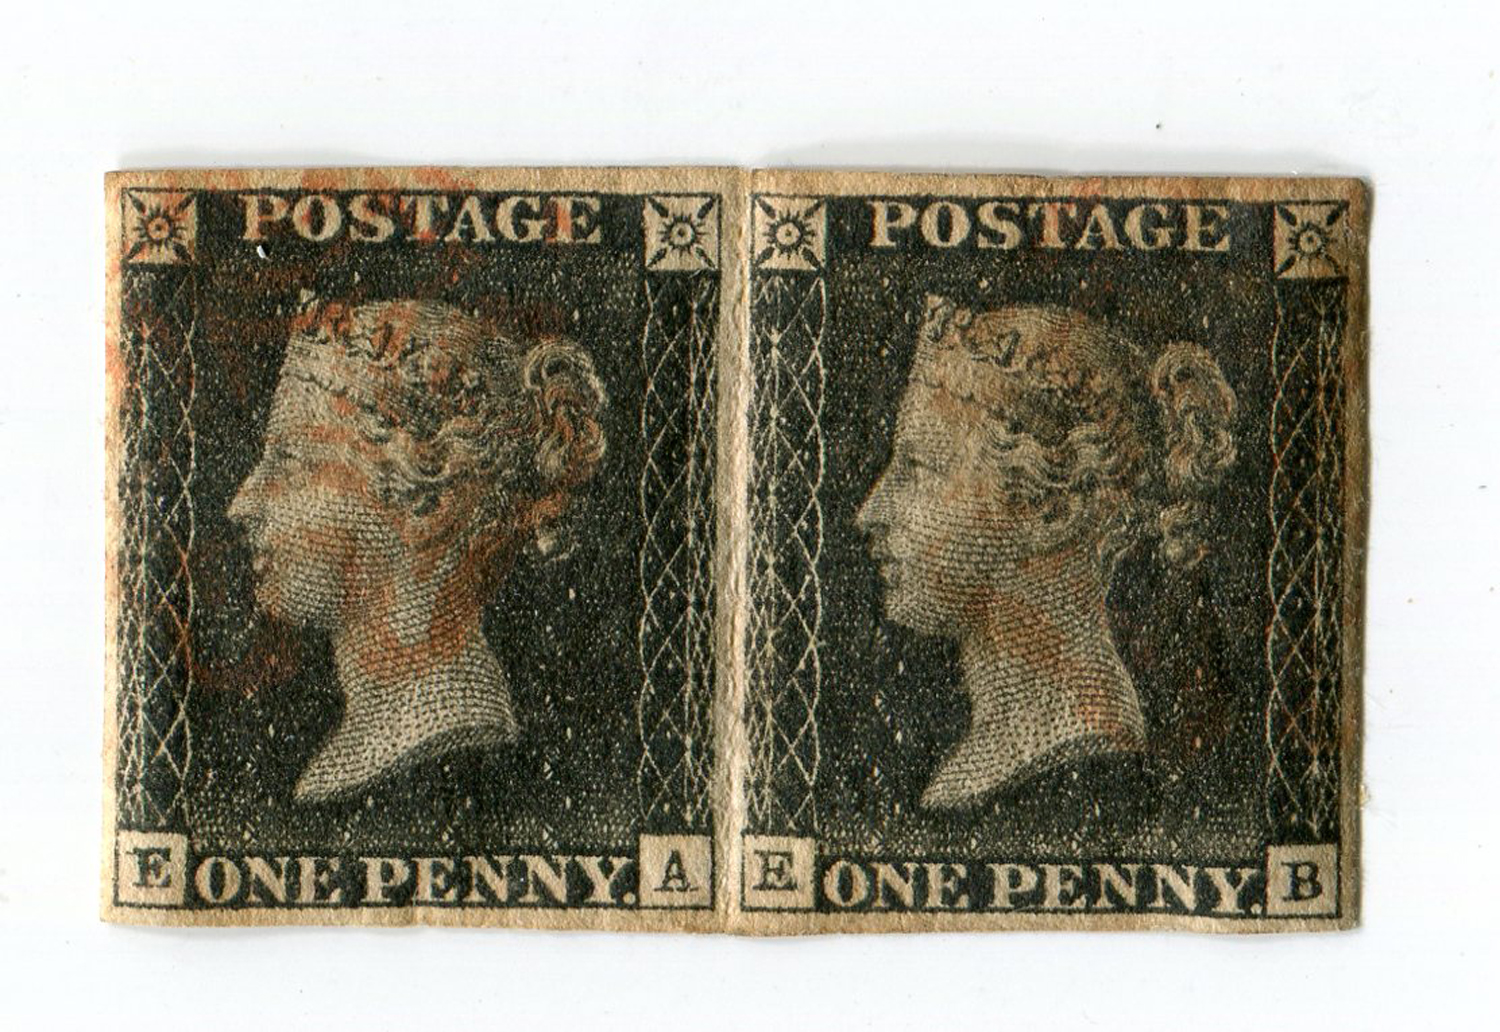 A small box of Queen Victorian line engraved stamps, including an 1840 1d black pair, used, with